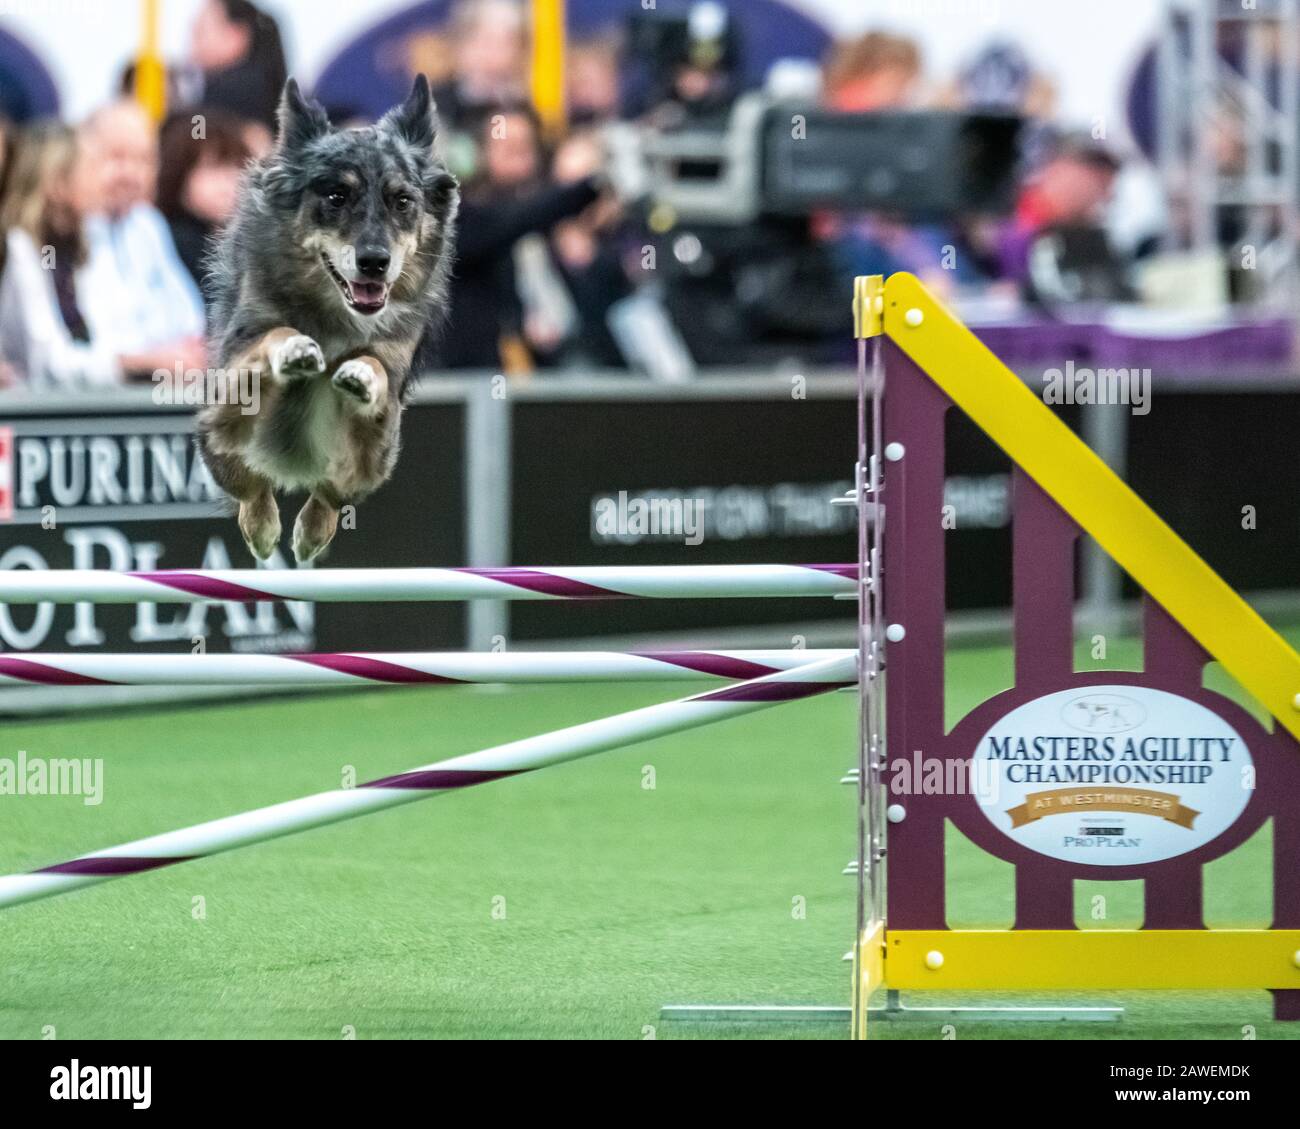 New York, USA. 8th Feb, 2020. Cote, an All American Dog, clears an obstacle during the qualifying round of The Westminster Kennel Club Dog show Masters Agility Championship in New York city. Credit: Enrique Shore/Alamy Live News Stock Photo